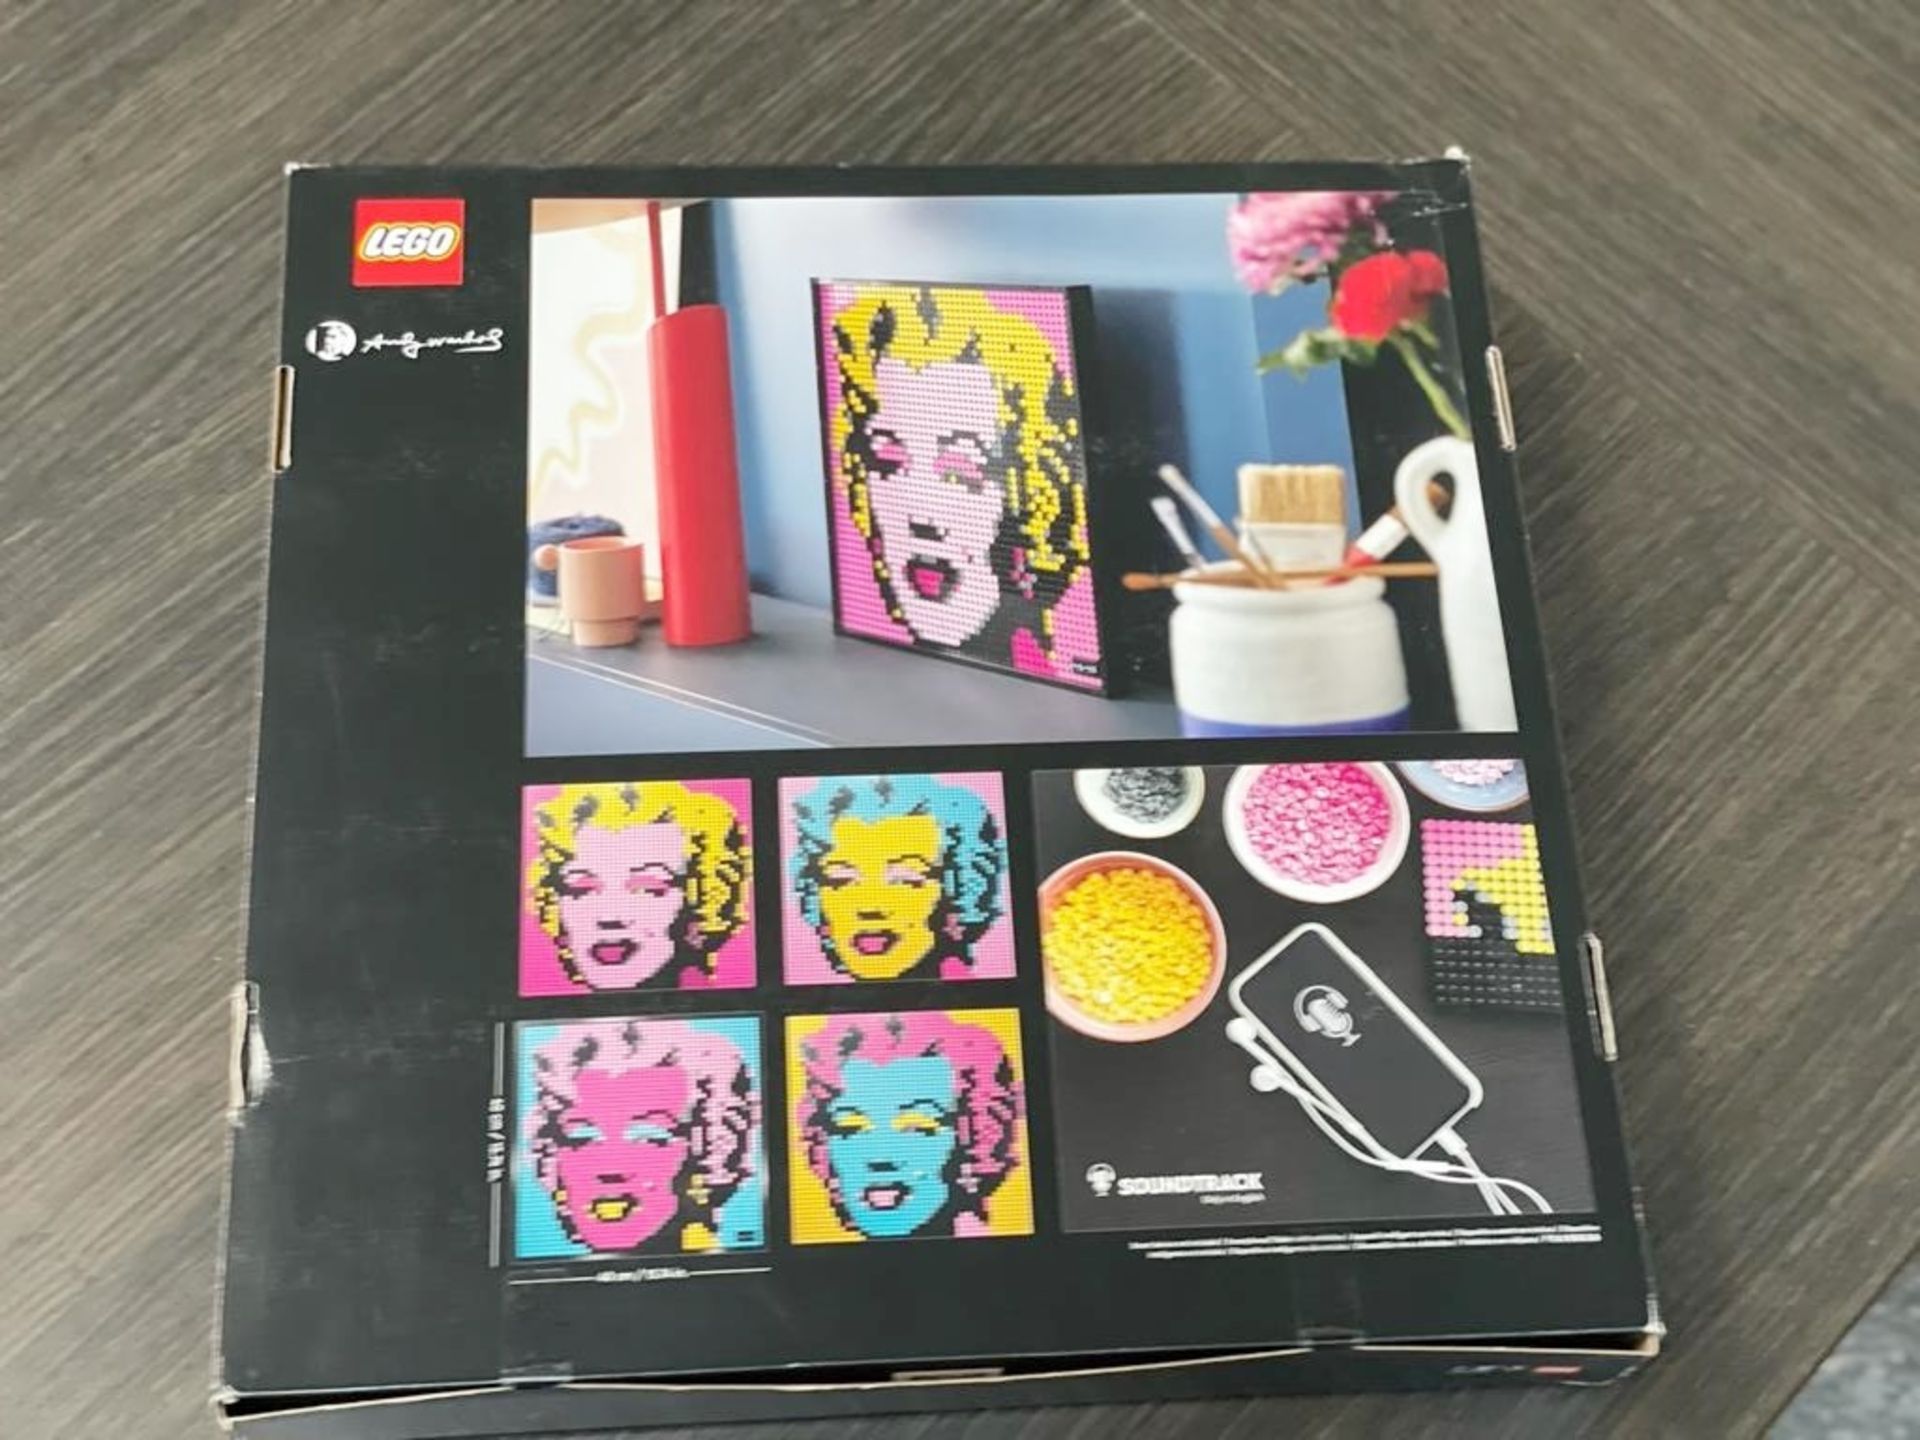 1 x Lego Art 31197 Andy Warhol's Marilyn Monroe set - Brand New RRP £90.00 - CL987 - Ref: - Image 2 of 3